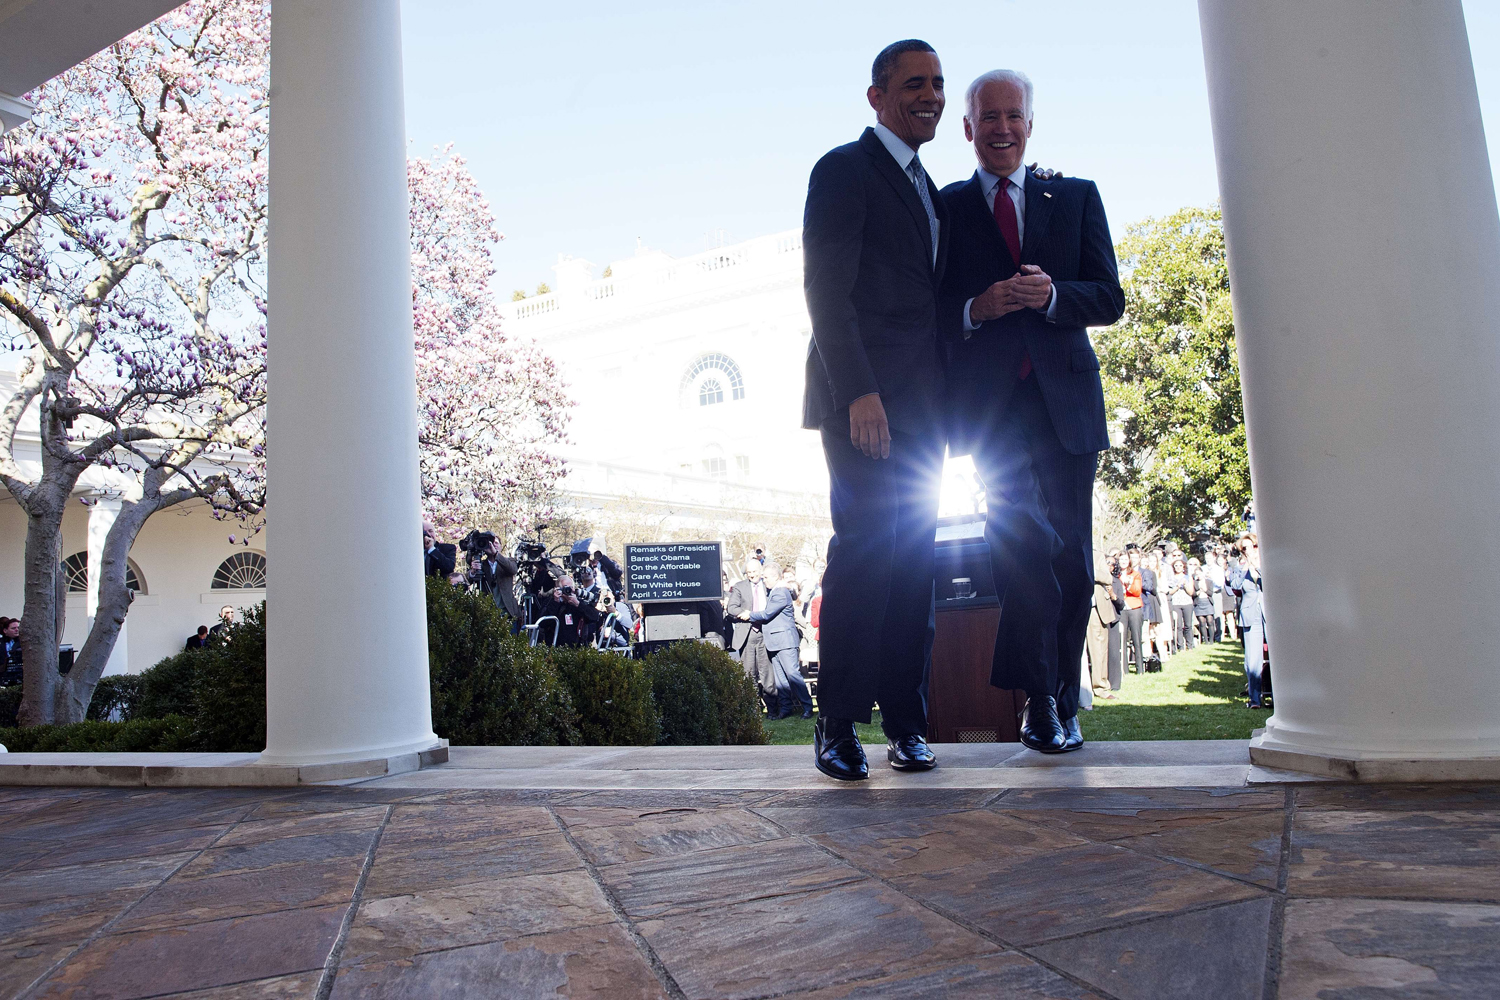 U.S. President Barack Obama walks back to the Oval Office with Vice President Joe Biden after he delivered a statement on the Affordable Care Act at the Rose Garden of the White House in Washington, DC, on April 1, 2014.